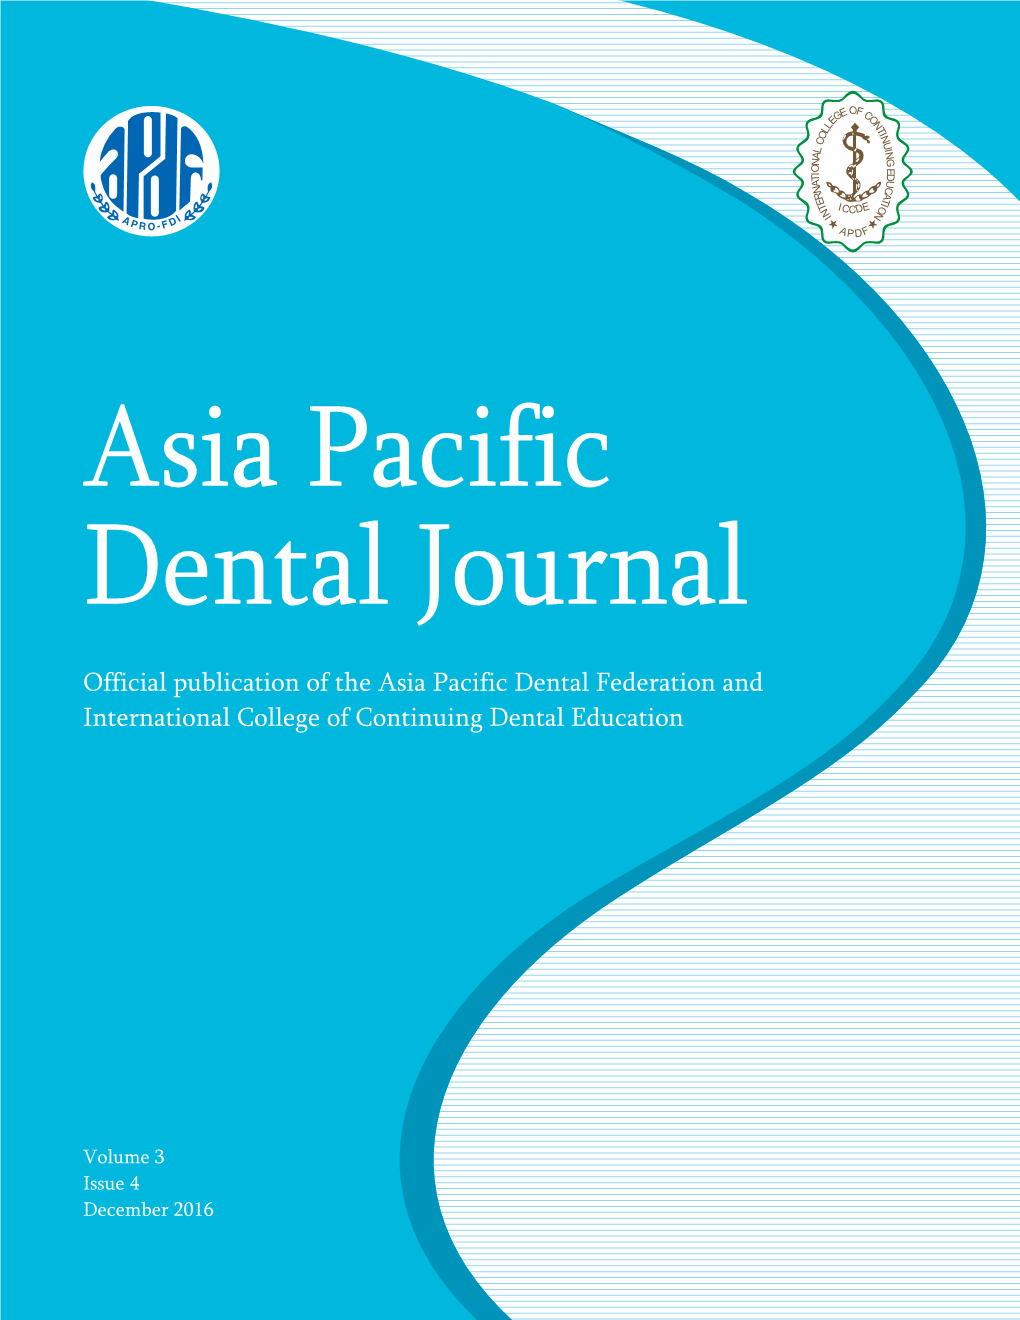 Official Publication of the Asia Pacific Dental Federation and International College of Continuing Dental Education